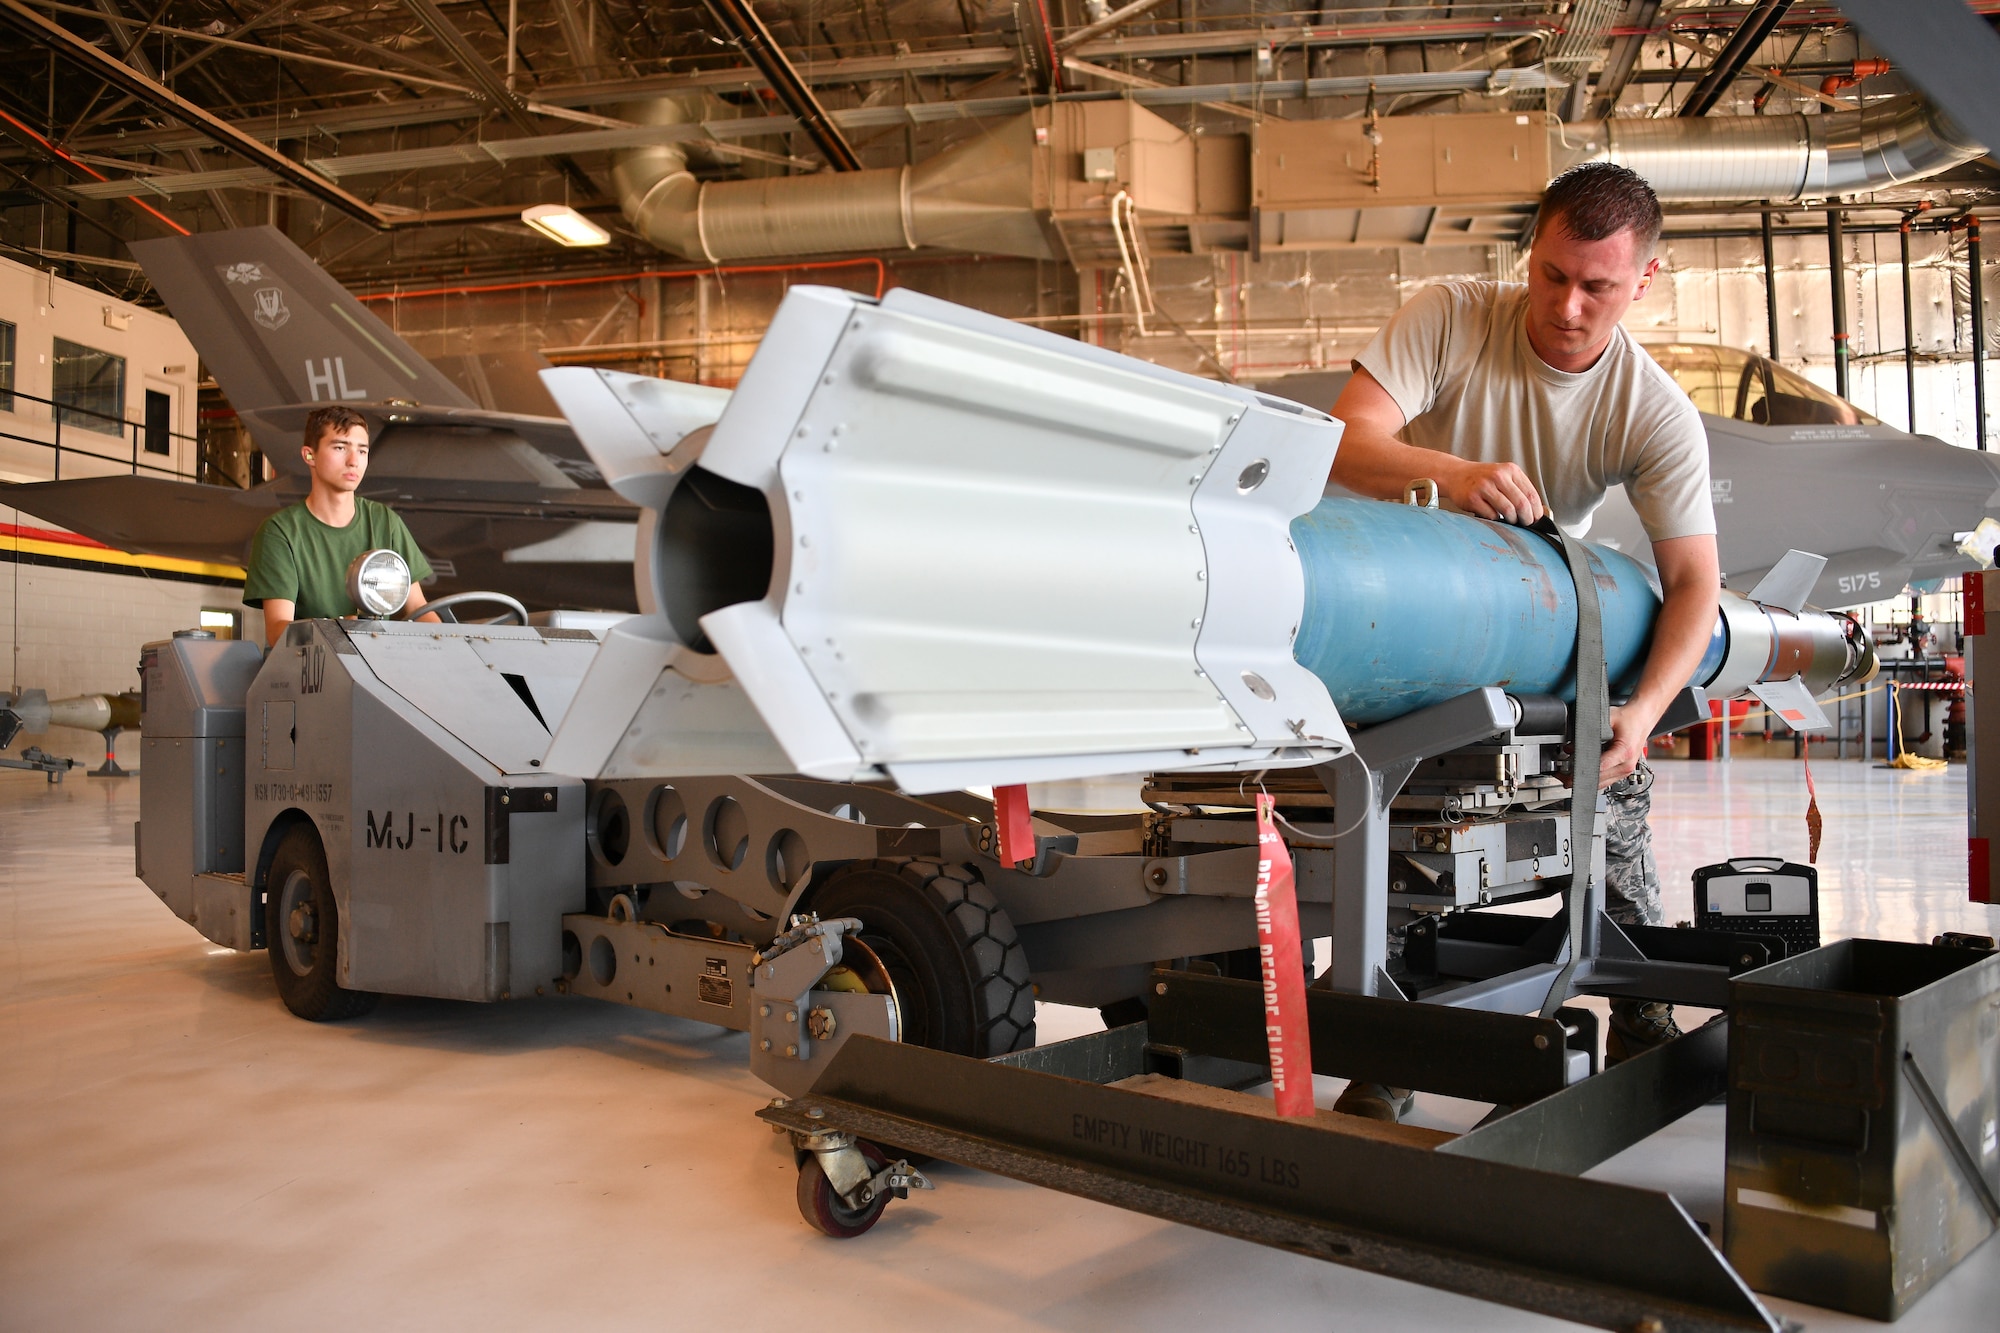 Staff Sgt. Andrew Rapp (right) and Senior Airman Connor Hansen, 419th Aircraft Maintenance Squadron, prepare to load a weapon onto an F-35 Lightning II during a friendly competition July 6 at Hill Air Force Base, Utah